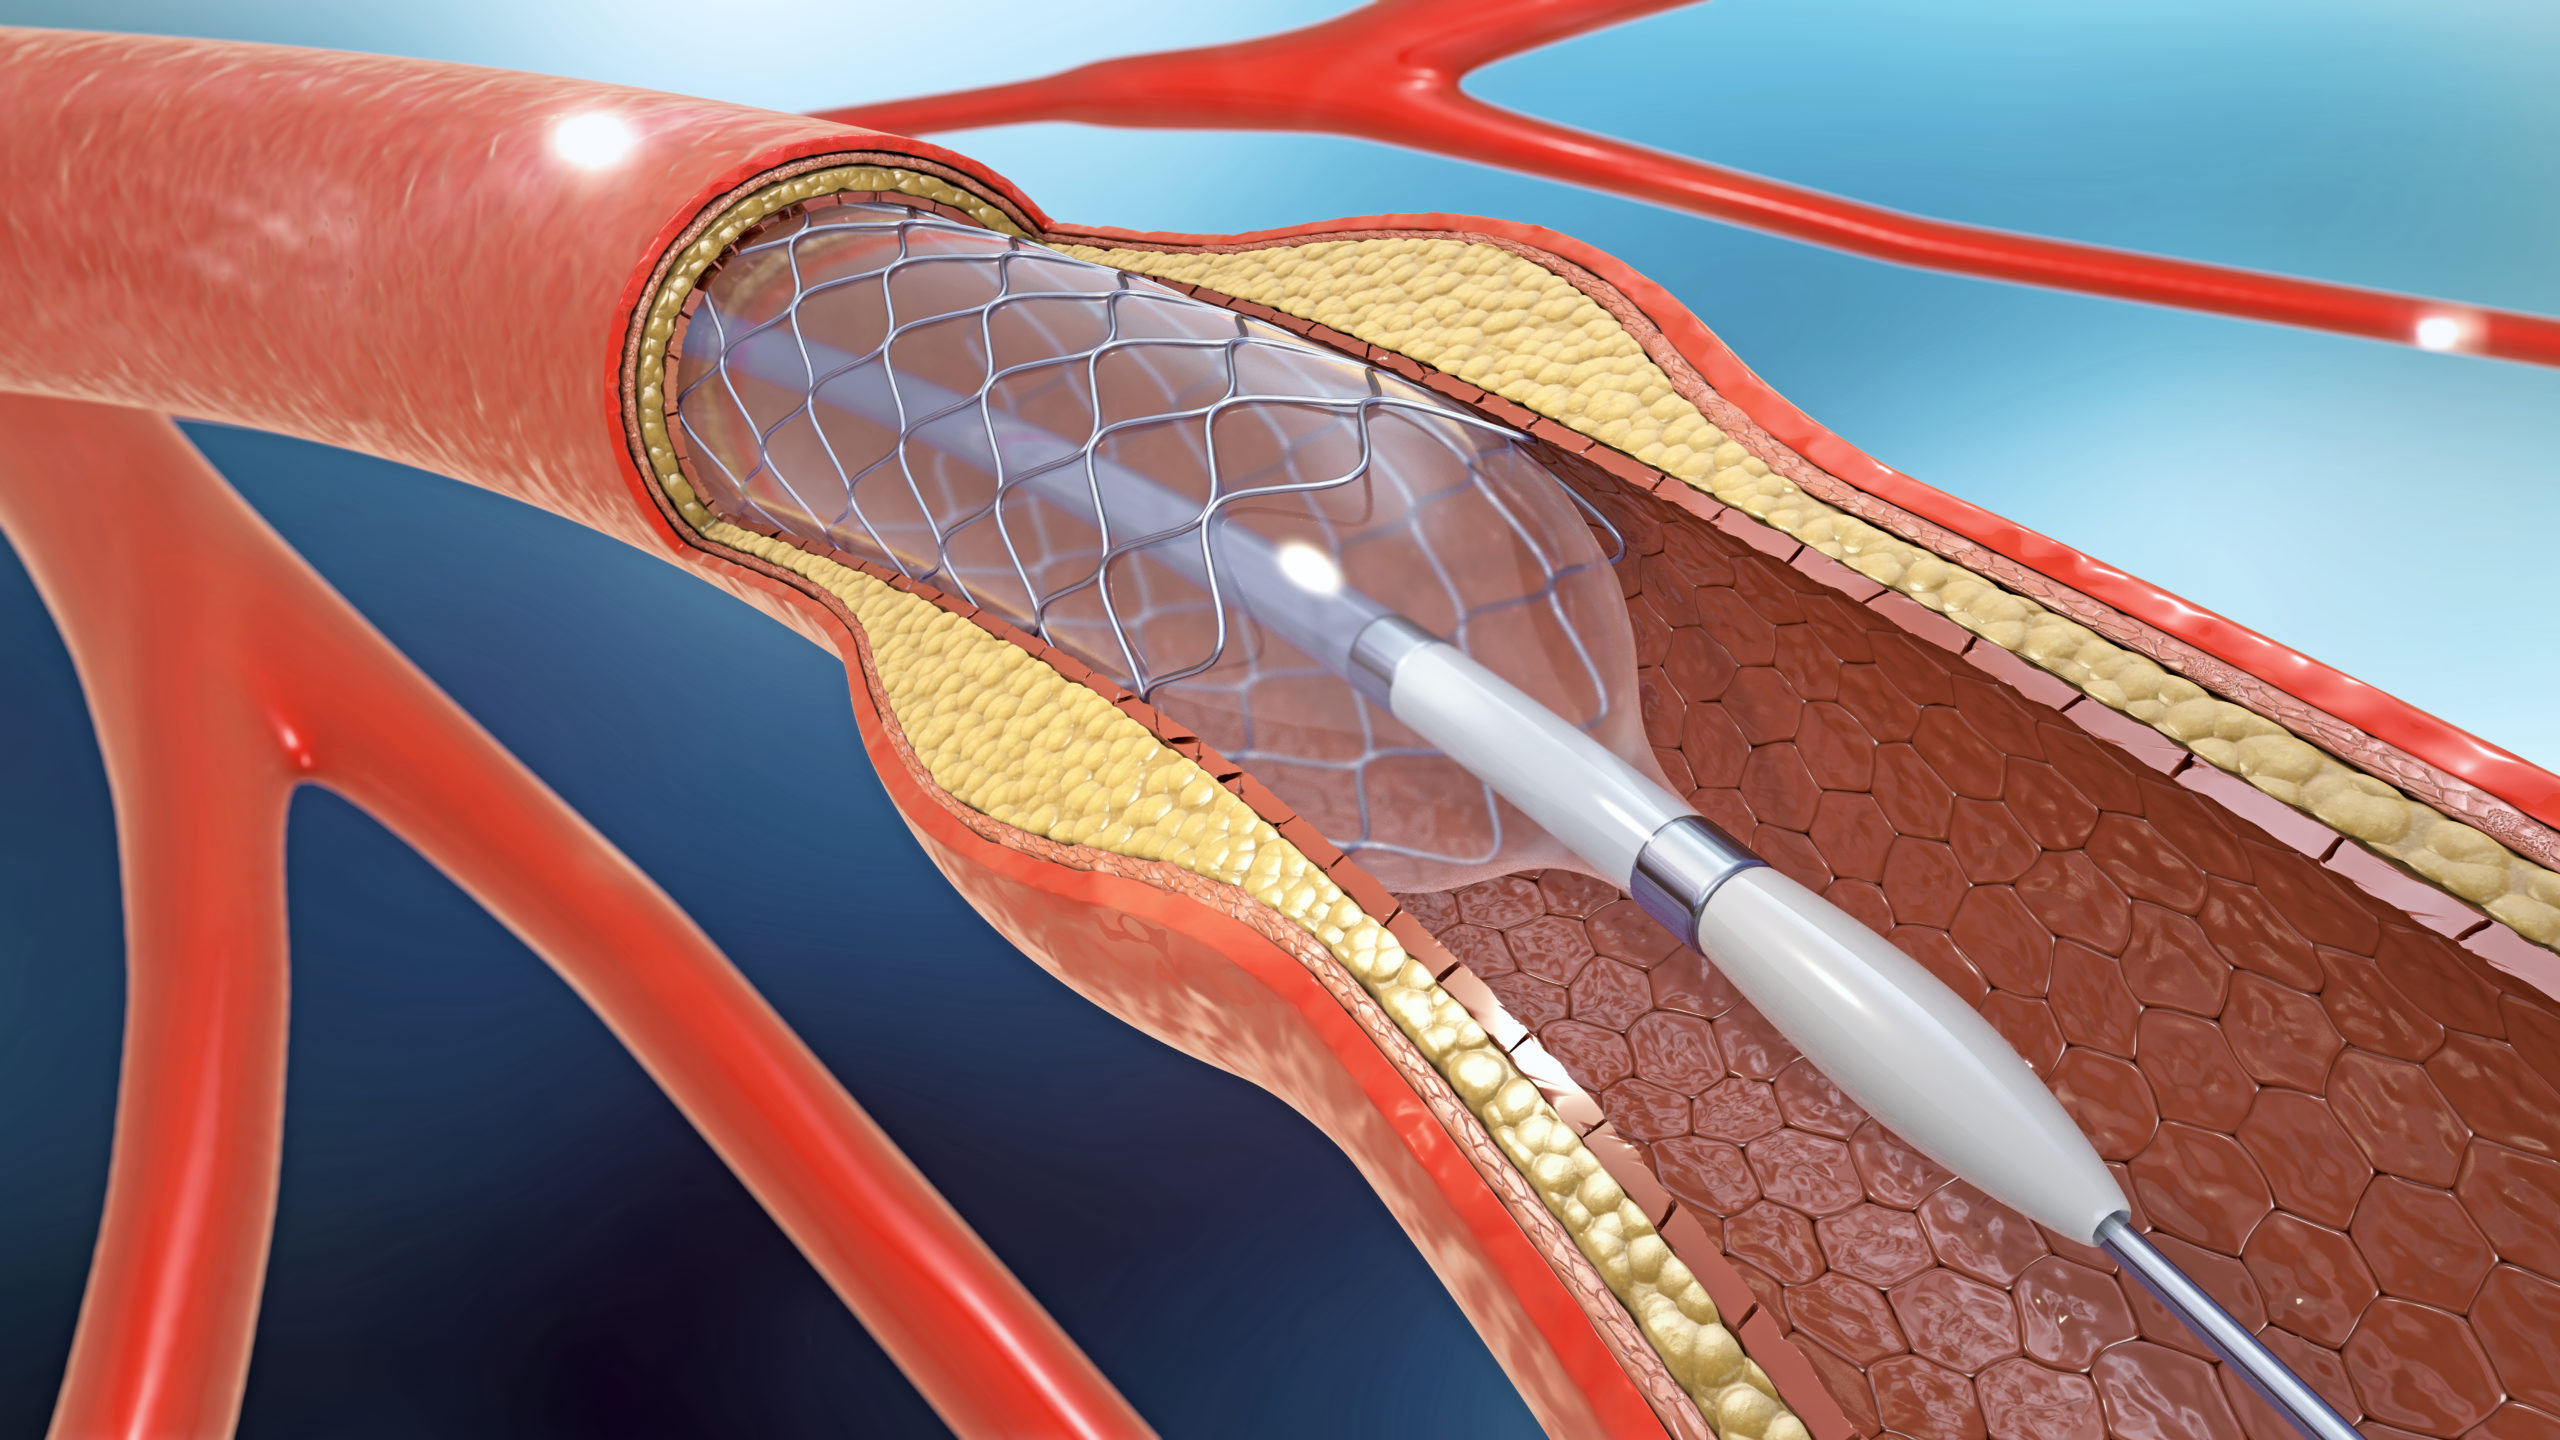 3d Illustration of Stent in Leg ArteryI. Supporting Blood Supply. Unblocks Leg Arteries. Peripheral Arterial Disease. PAD.